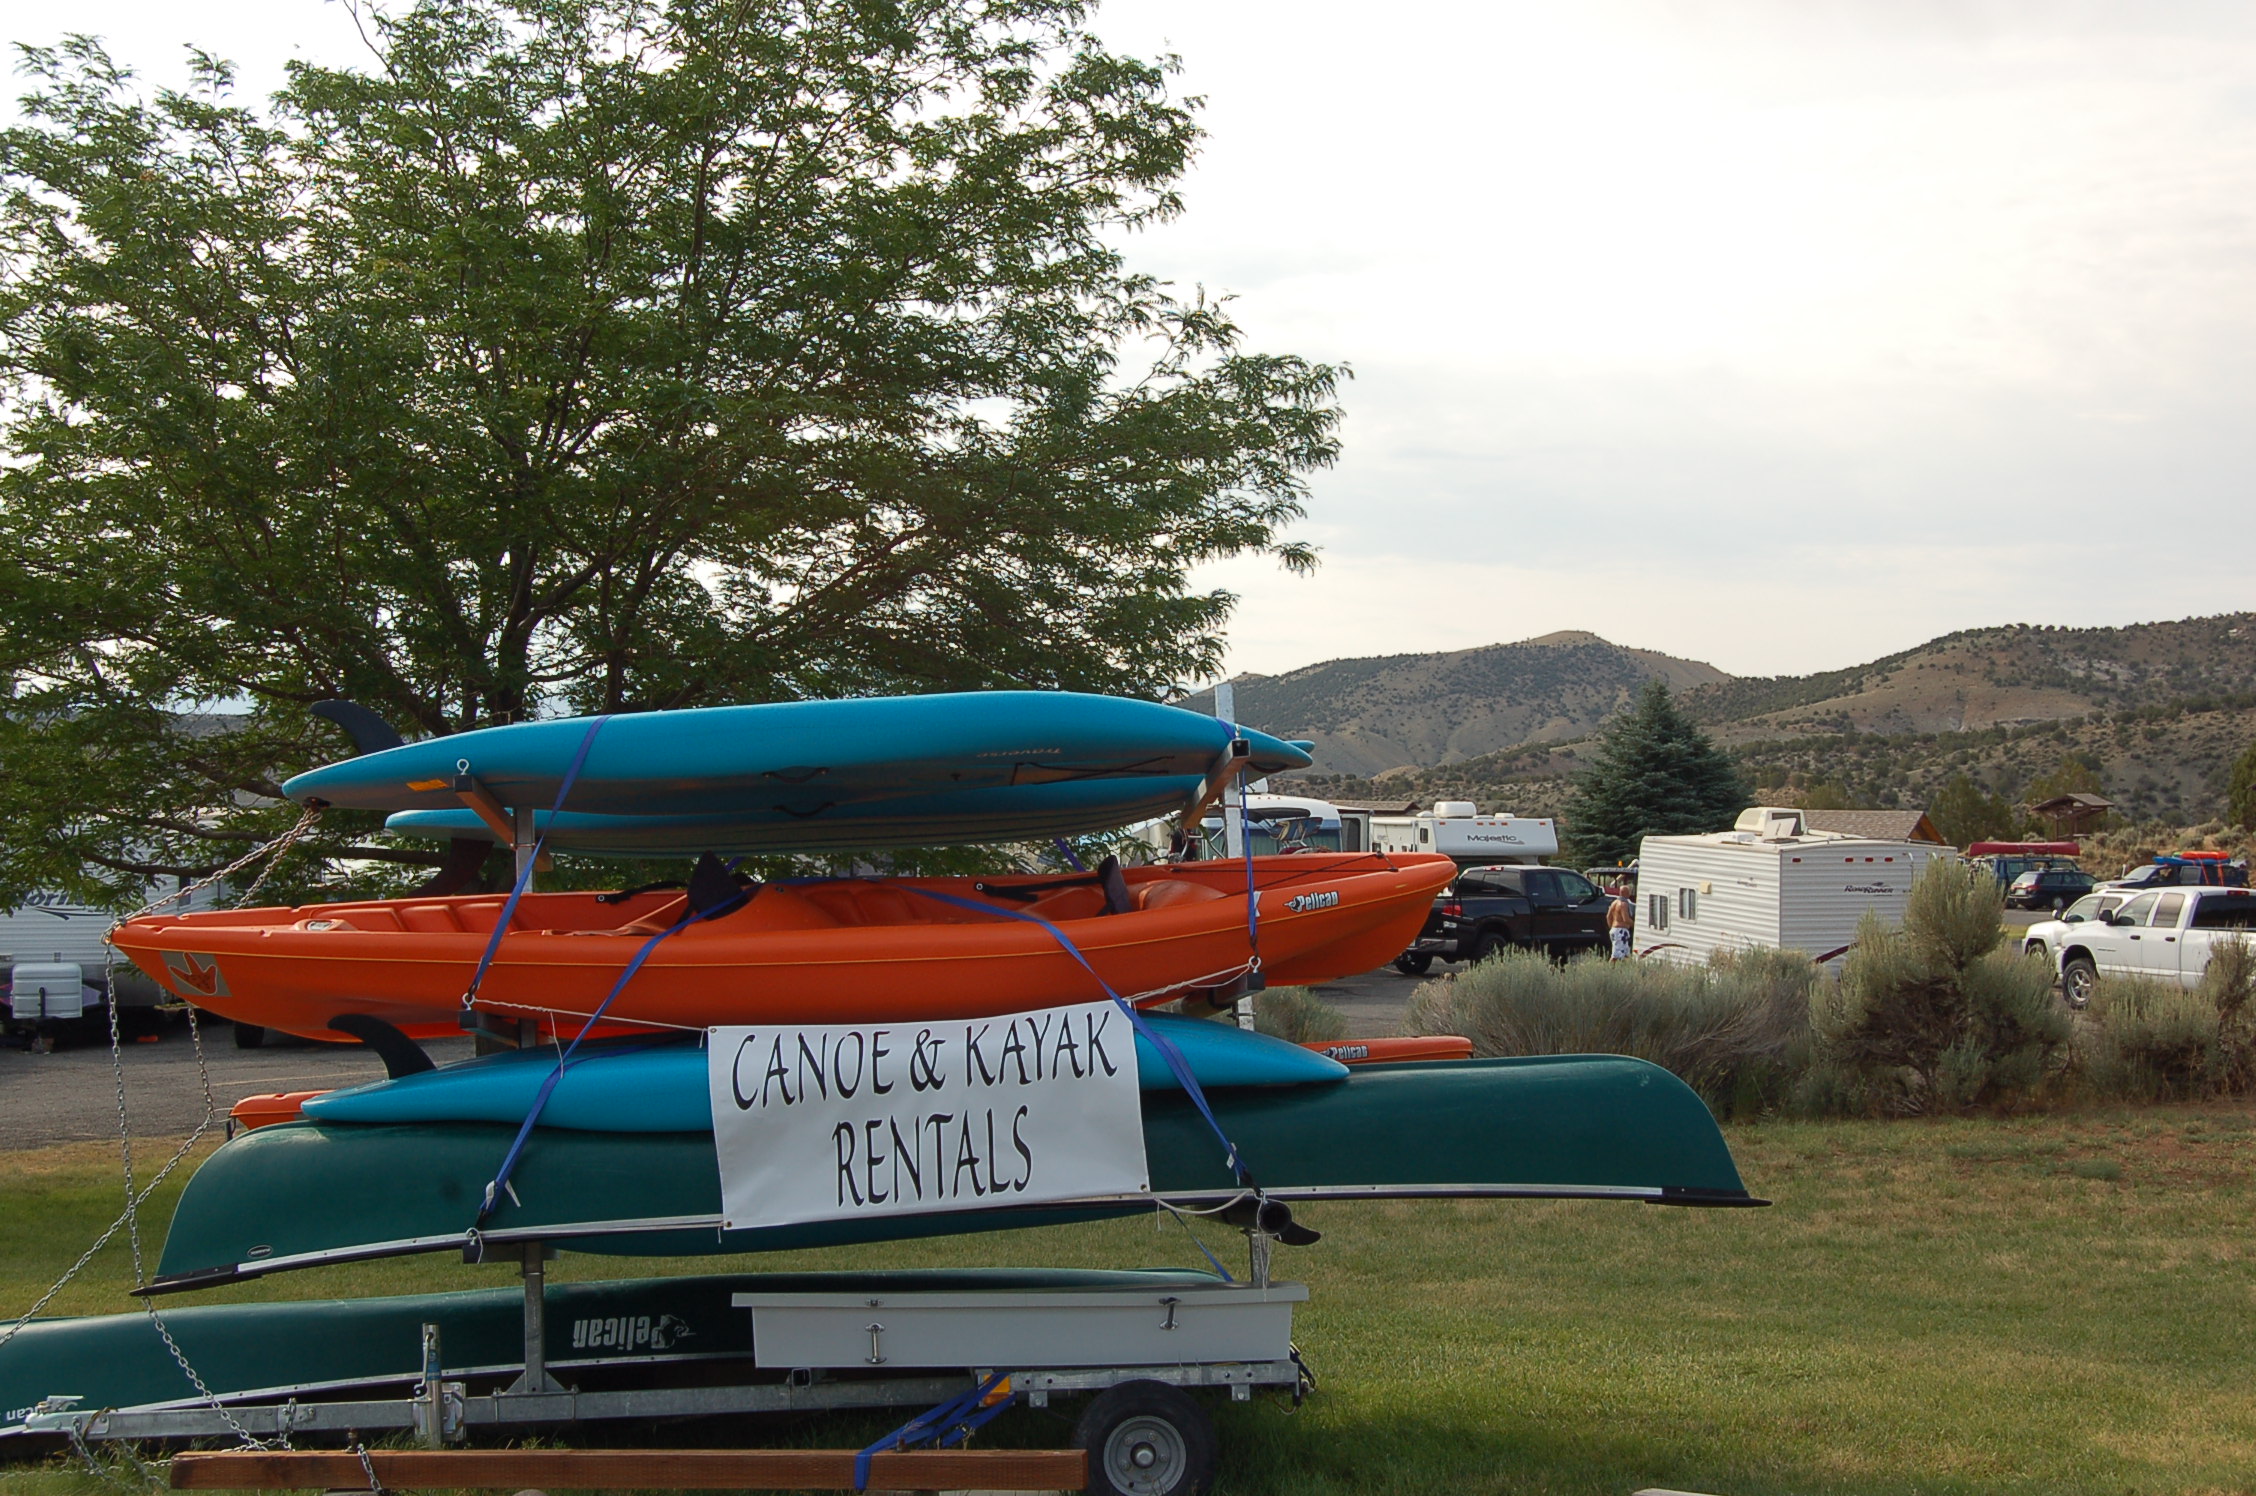 canoe and kayak rentals on trailer